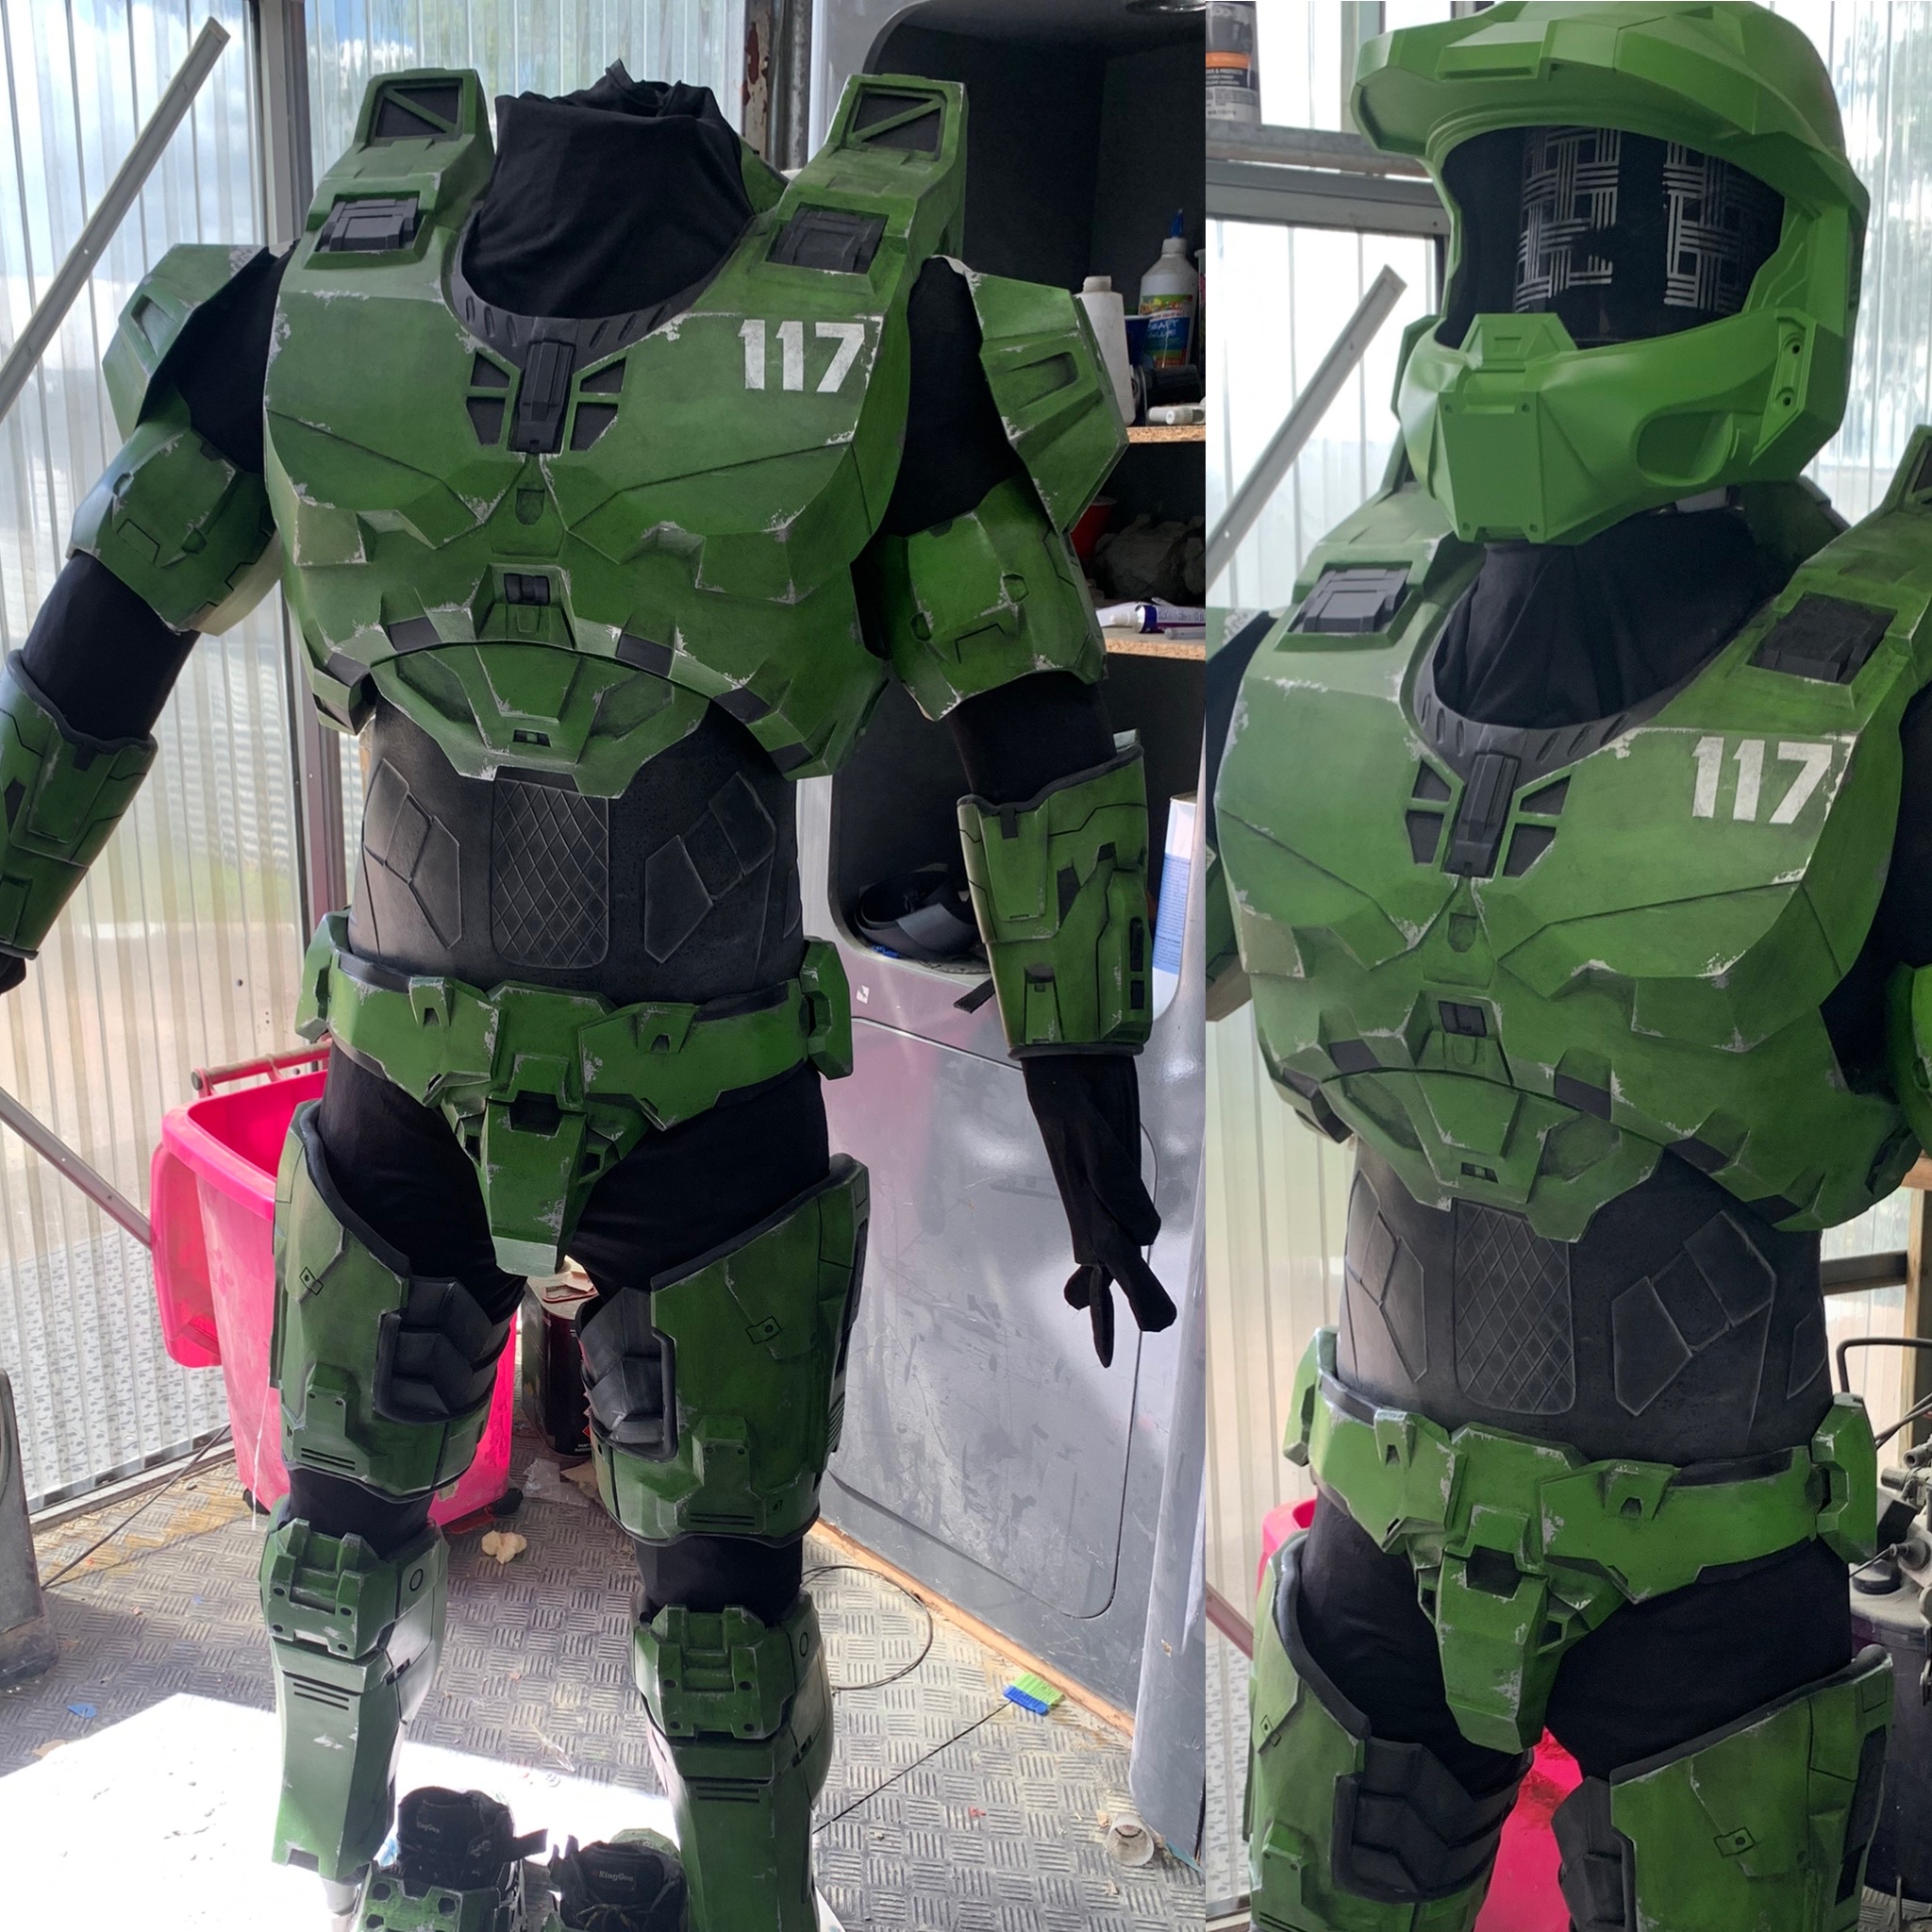 Xtremenoobs - Halo Infinite Build | Page 10 | Halo Costume and Prop ...